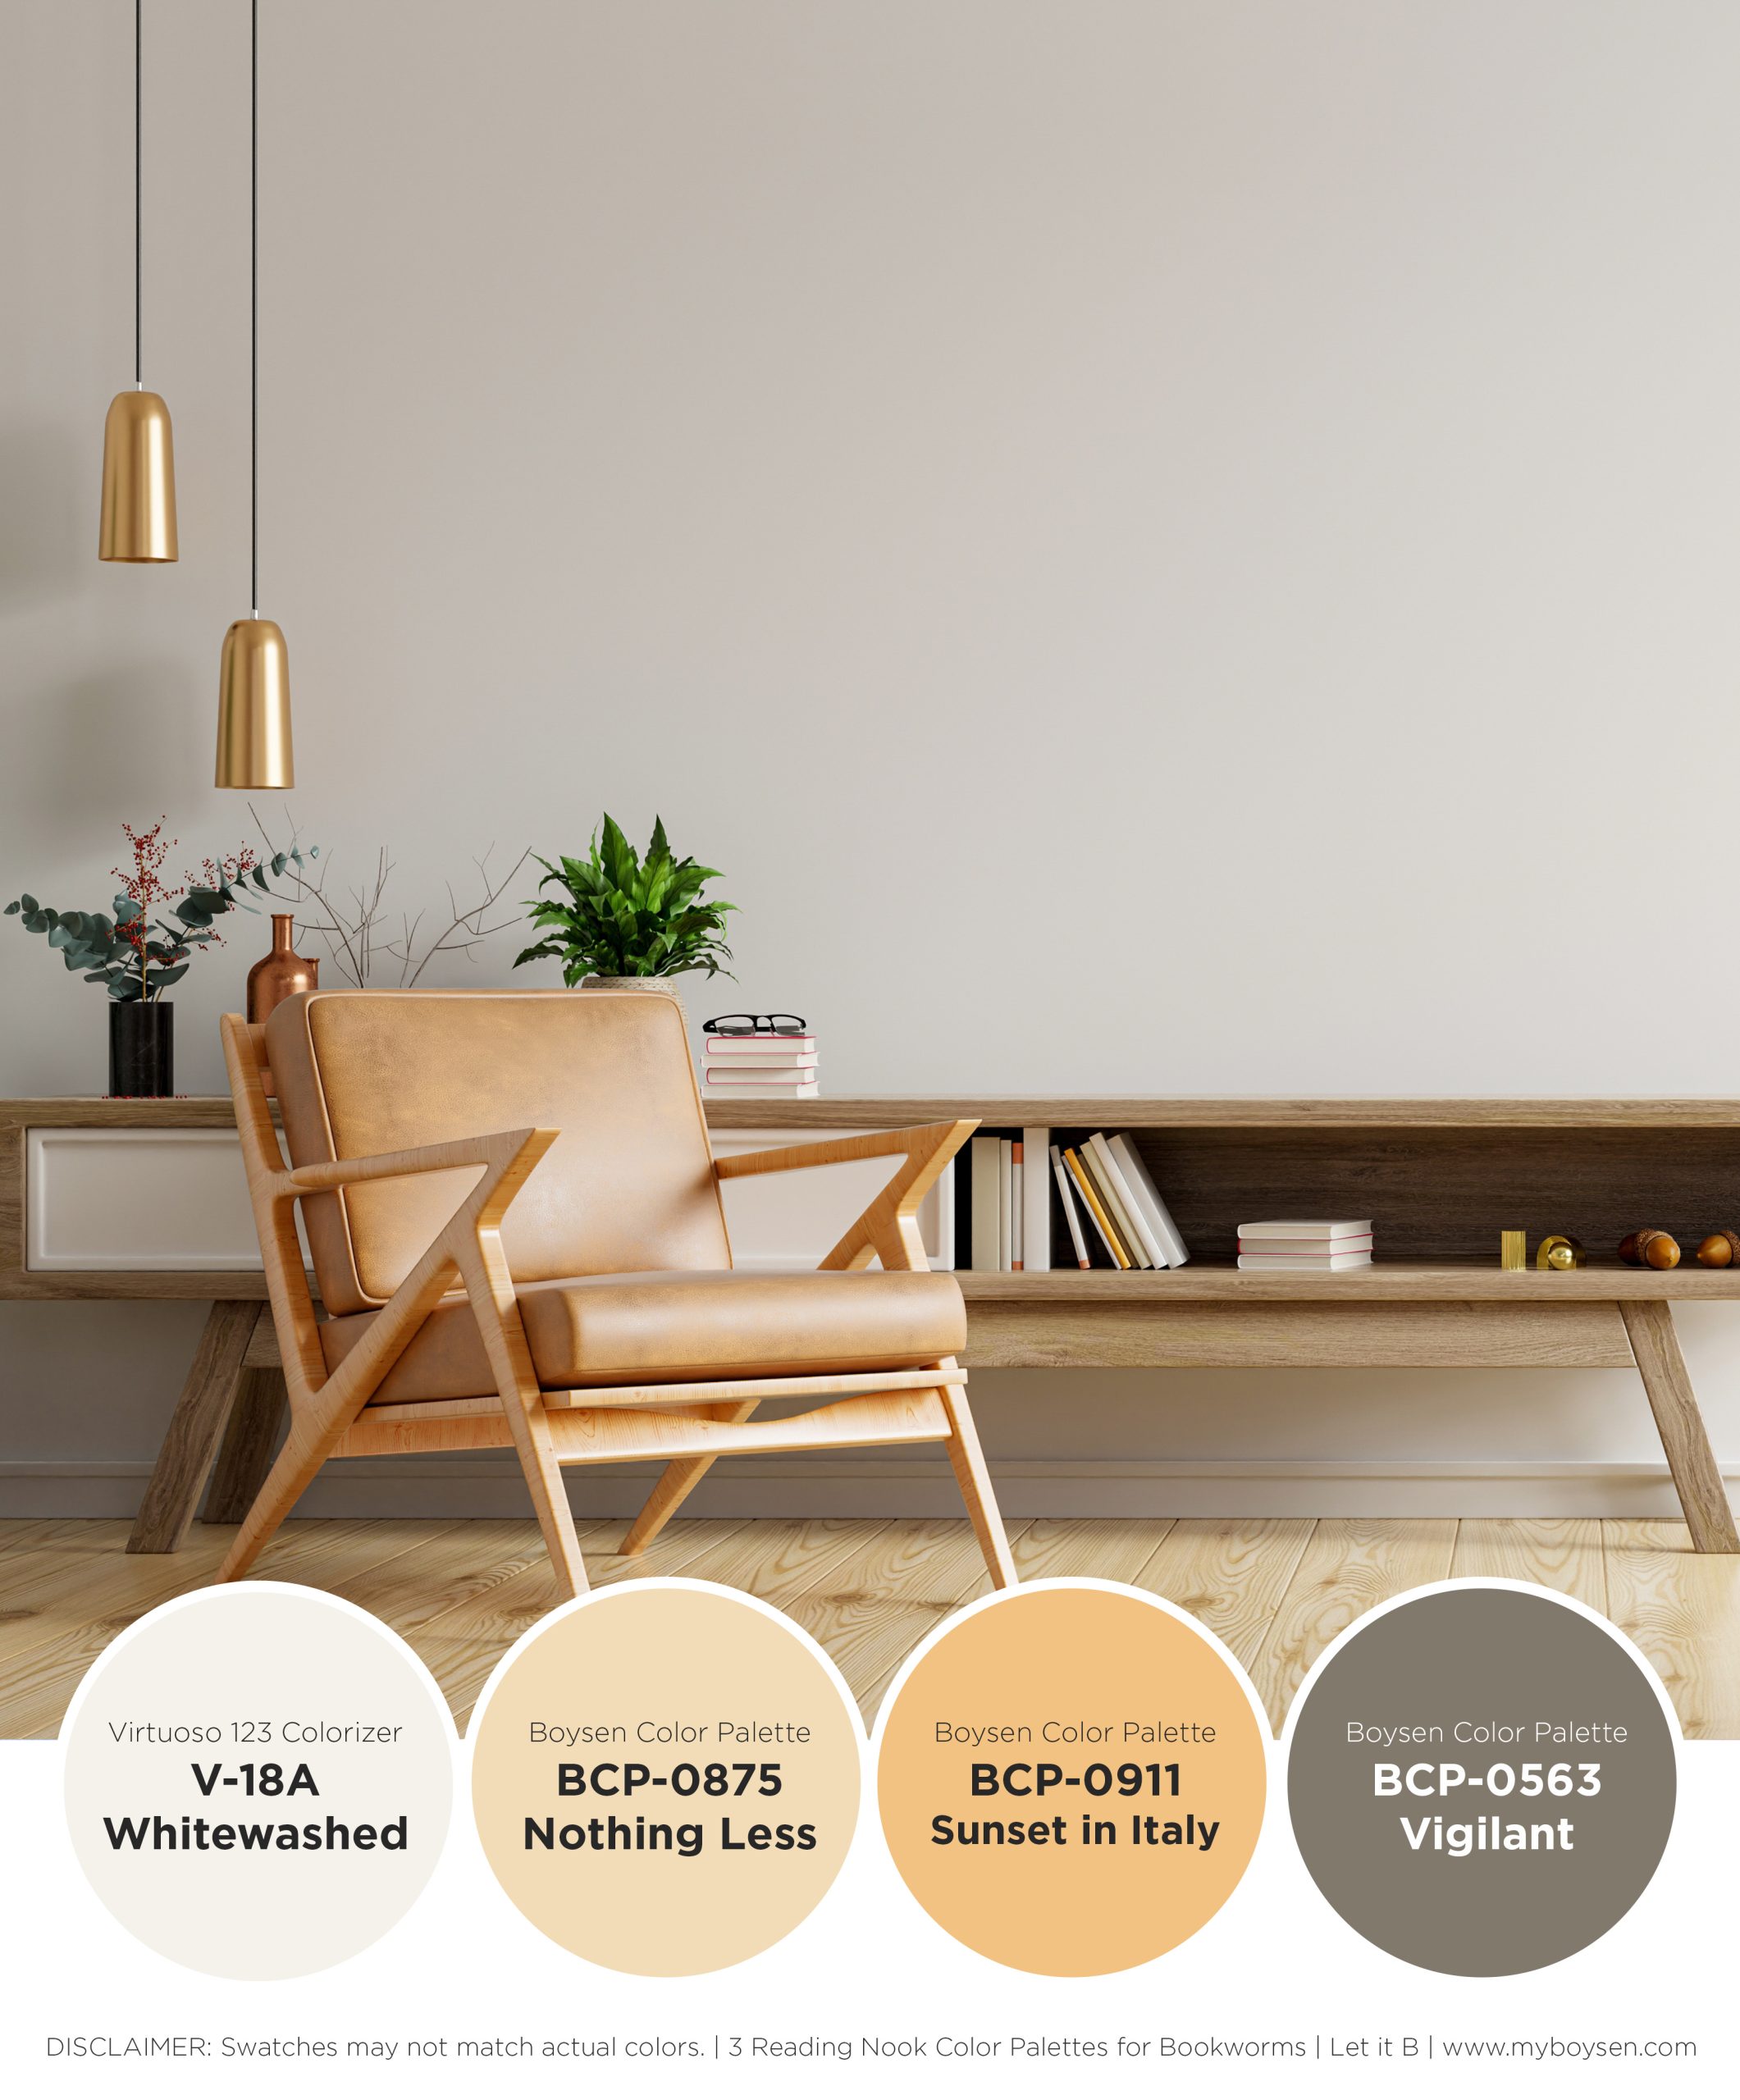 3 Reading Nook Color Palettes for Bookworms | MyBoysen